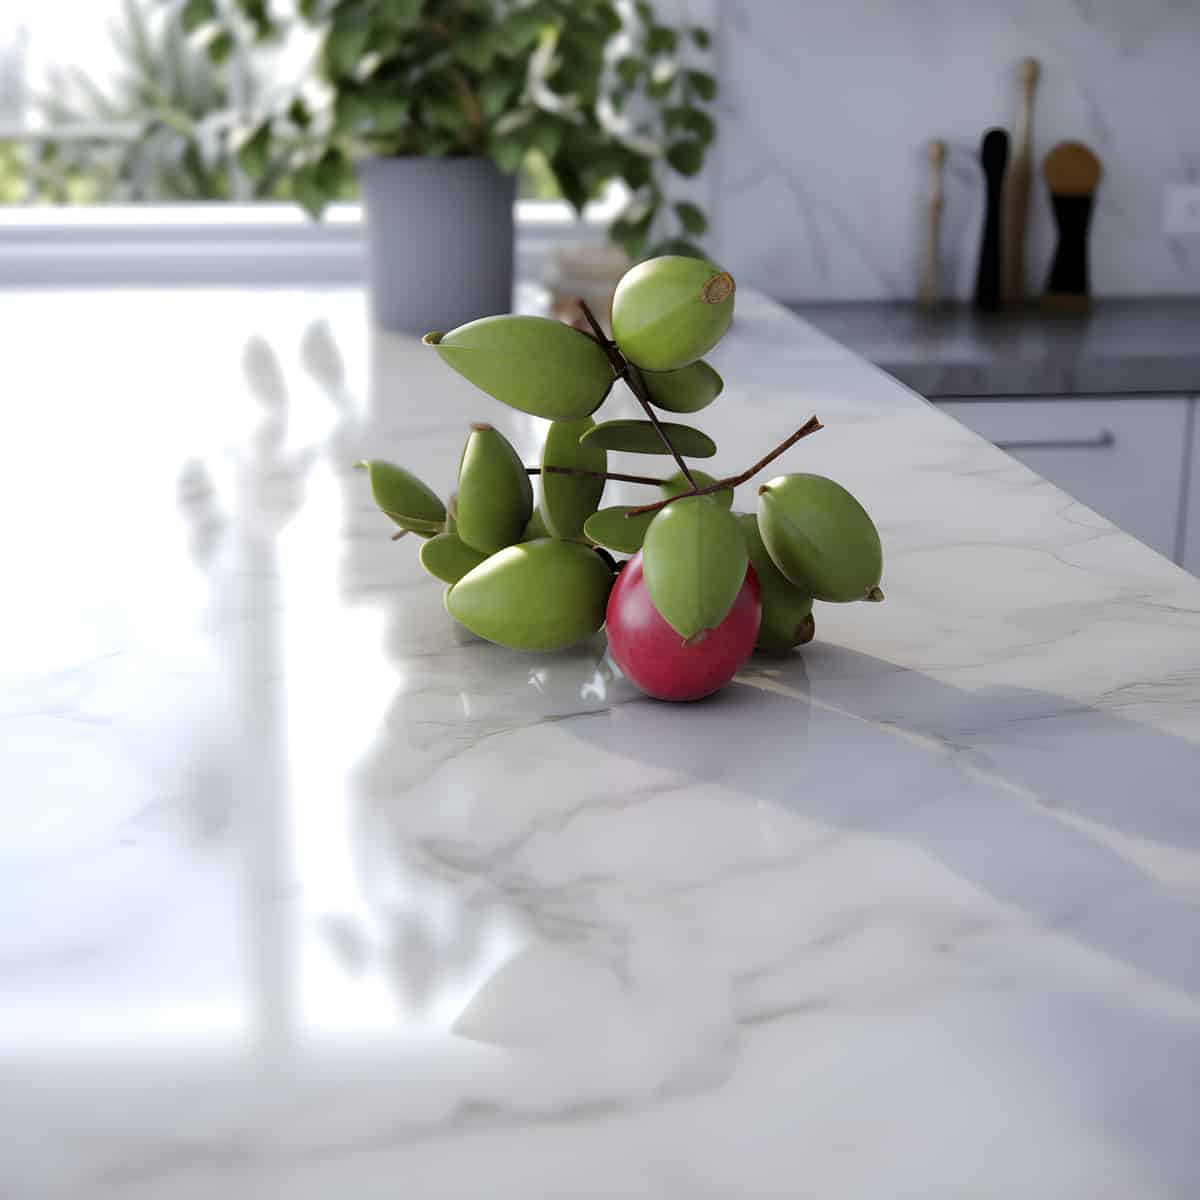 Sageretia Fruit on a kitchen counter